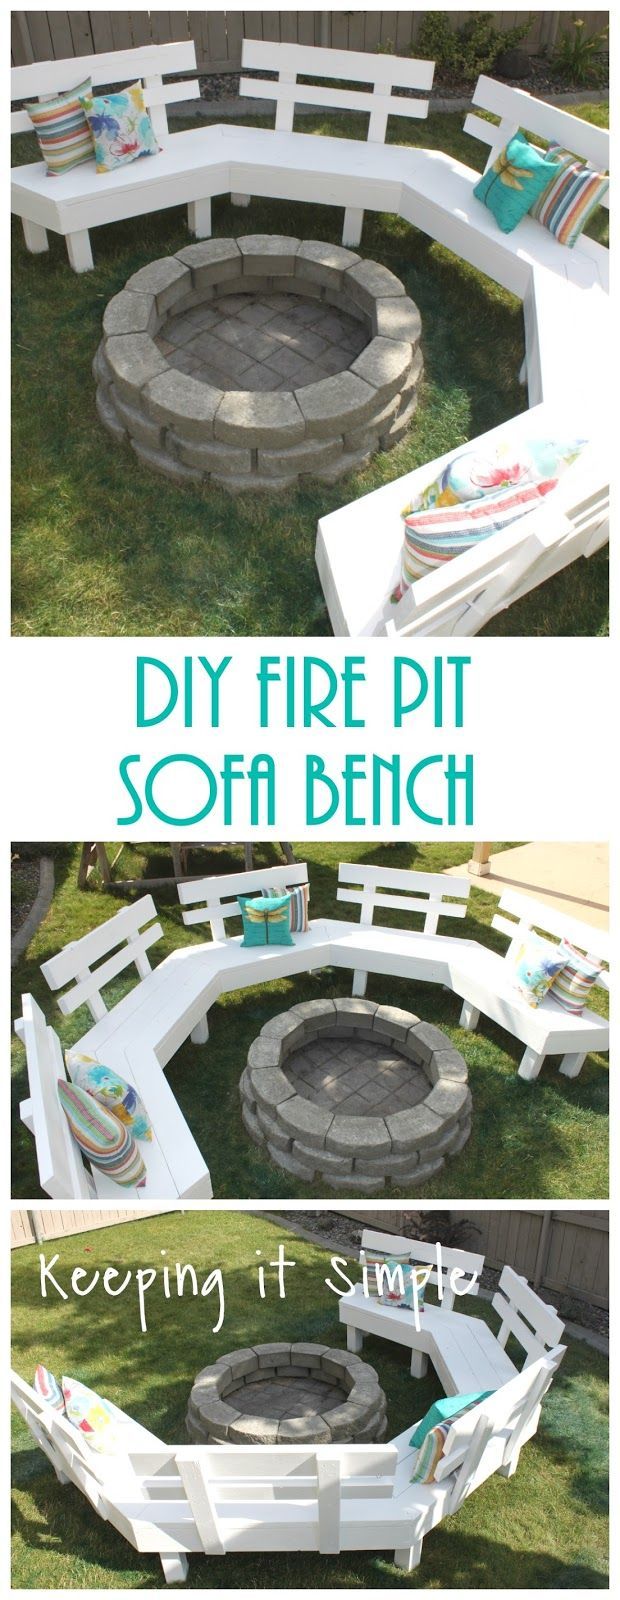 DIY fire pit sofa bench with detailed step by step instructions